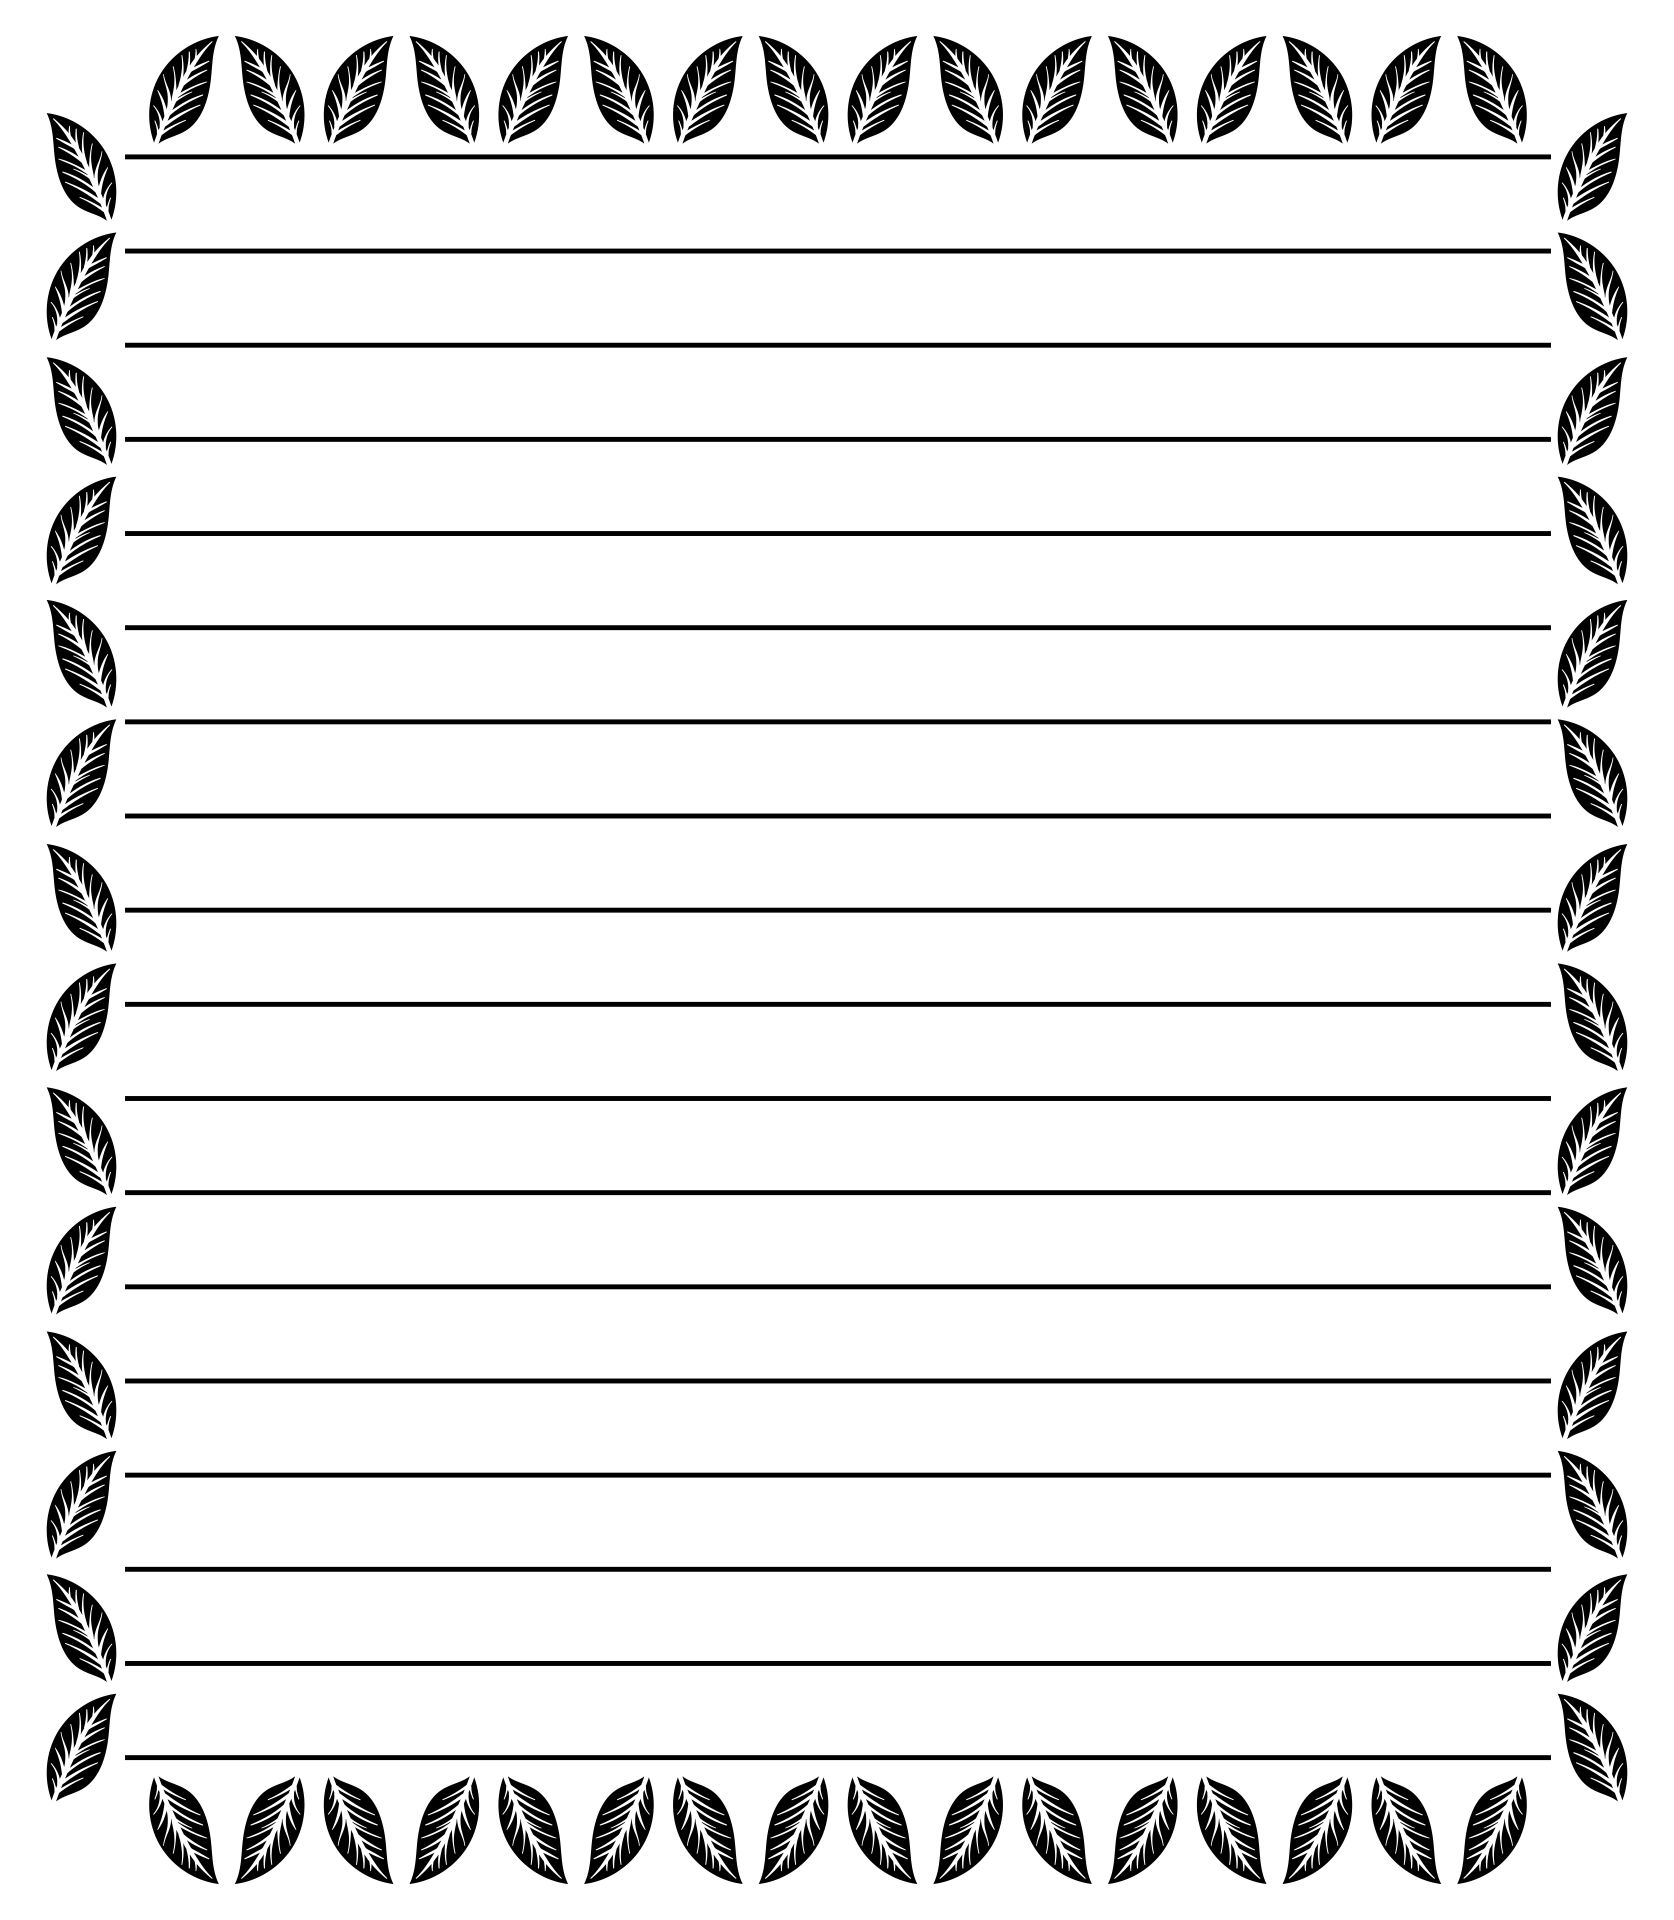 free-printable-stationery-paper-printable-world-holiday